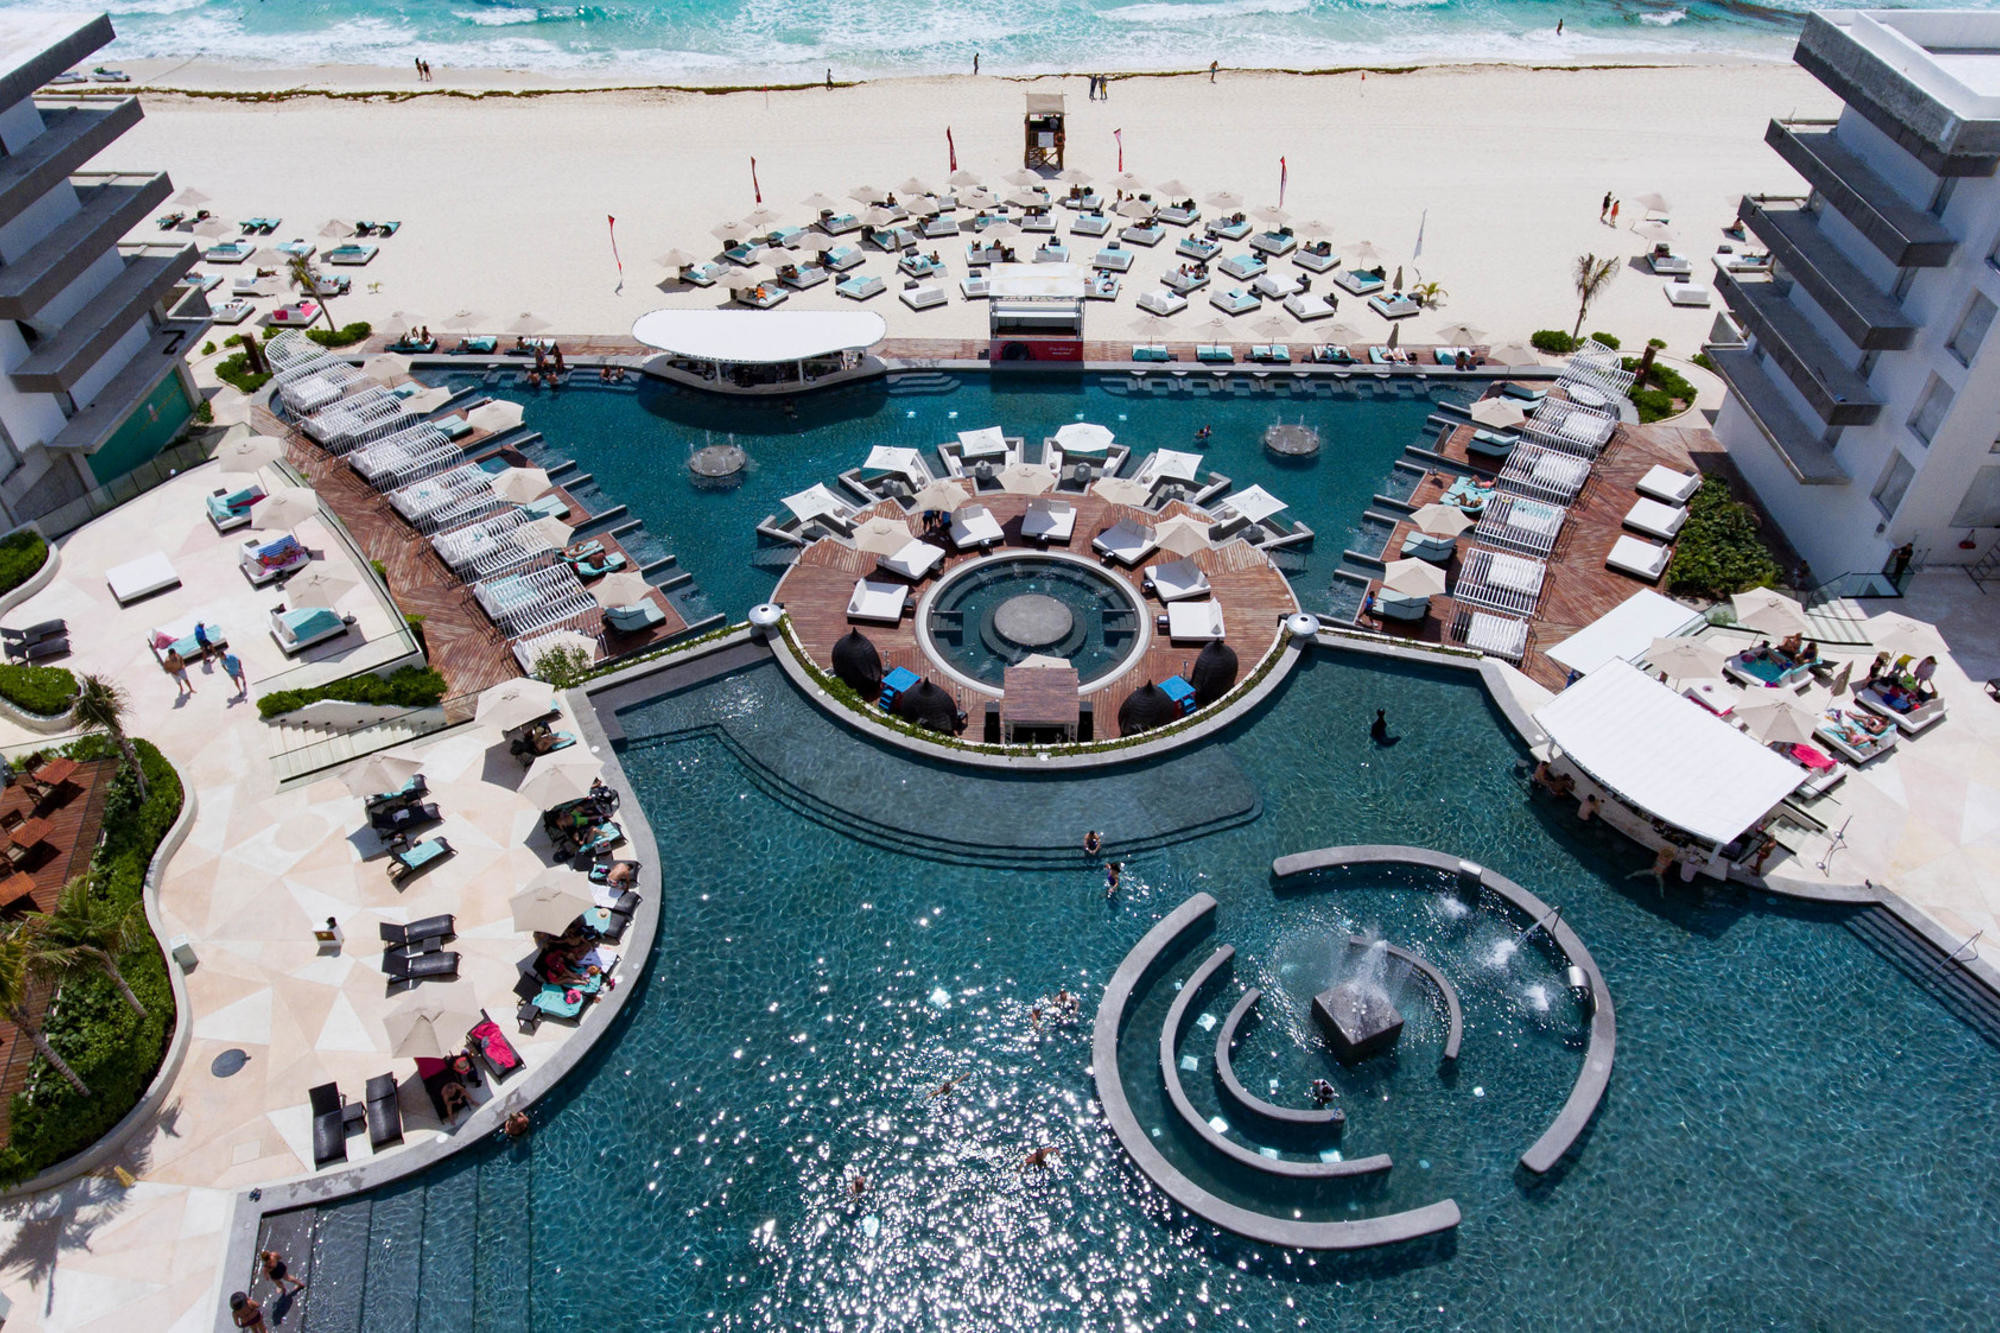 The pool and swim-up bar at Melody Maker Cancun